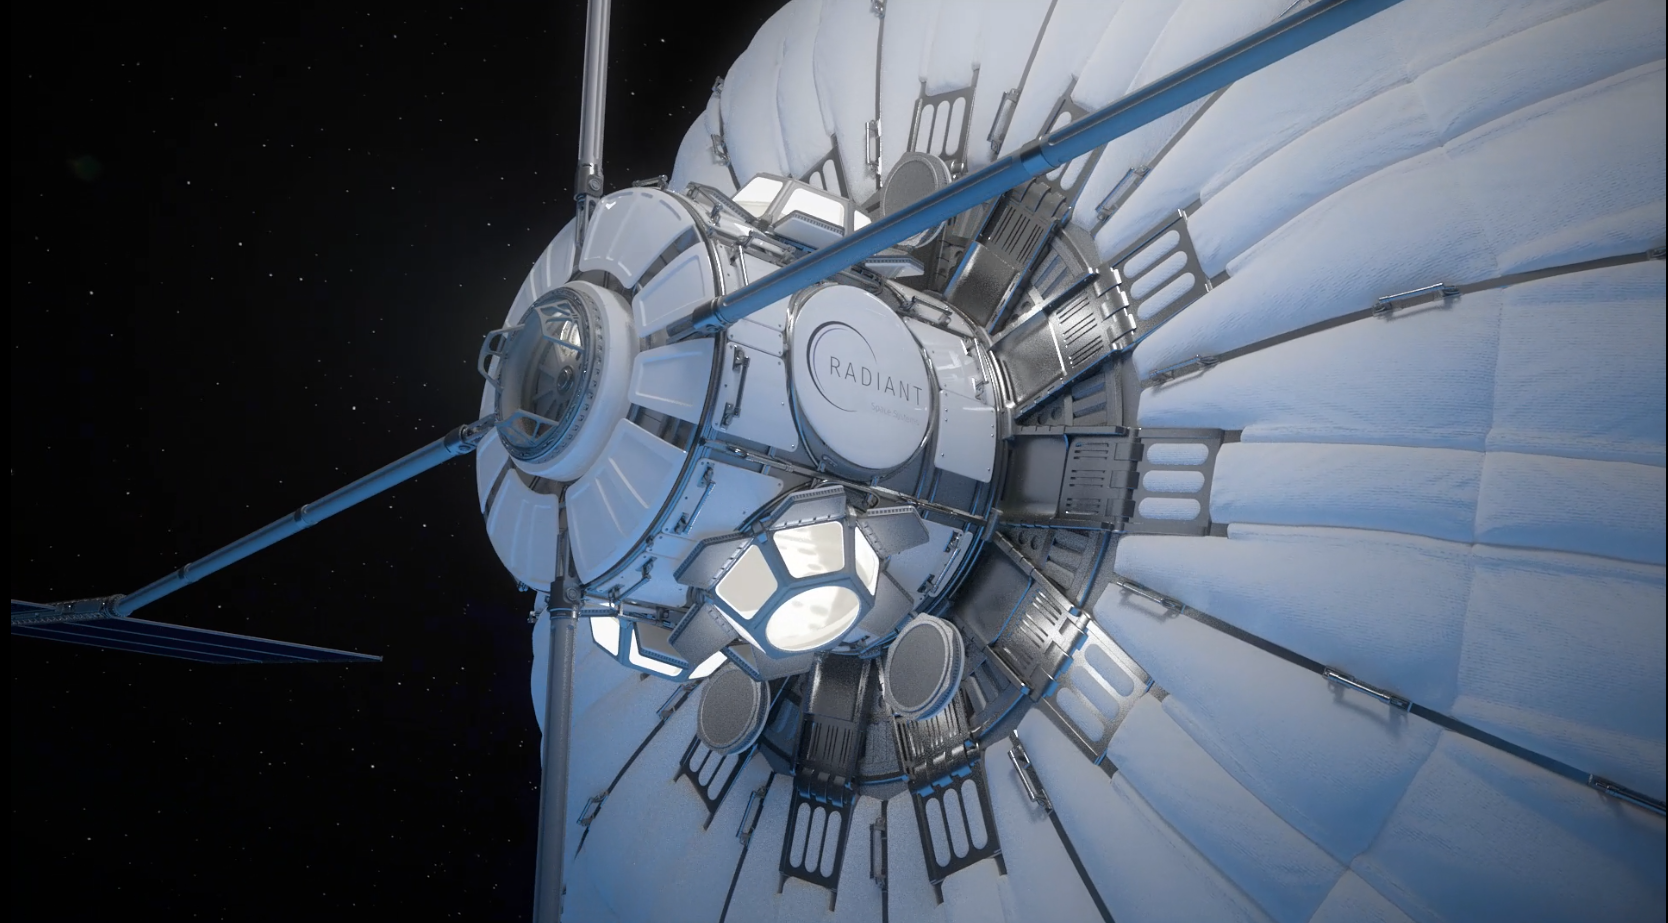 Rendering of exterior of Earthshine Mini. The habitat is expanded and lights illuminate the airlock from the inside.